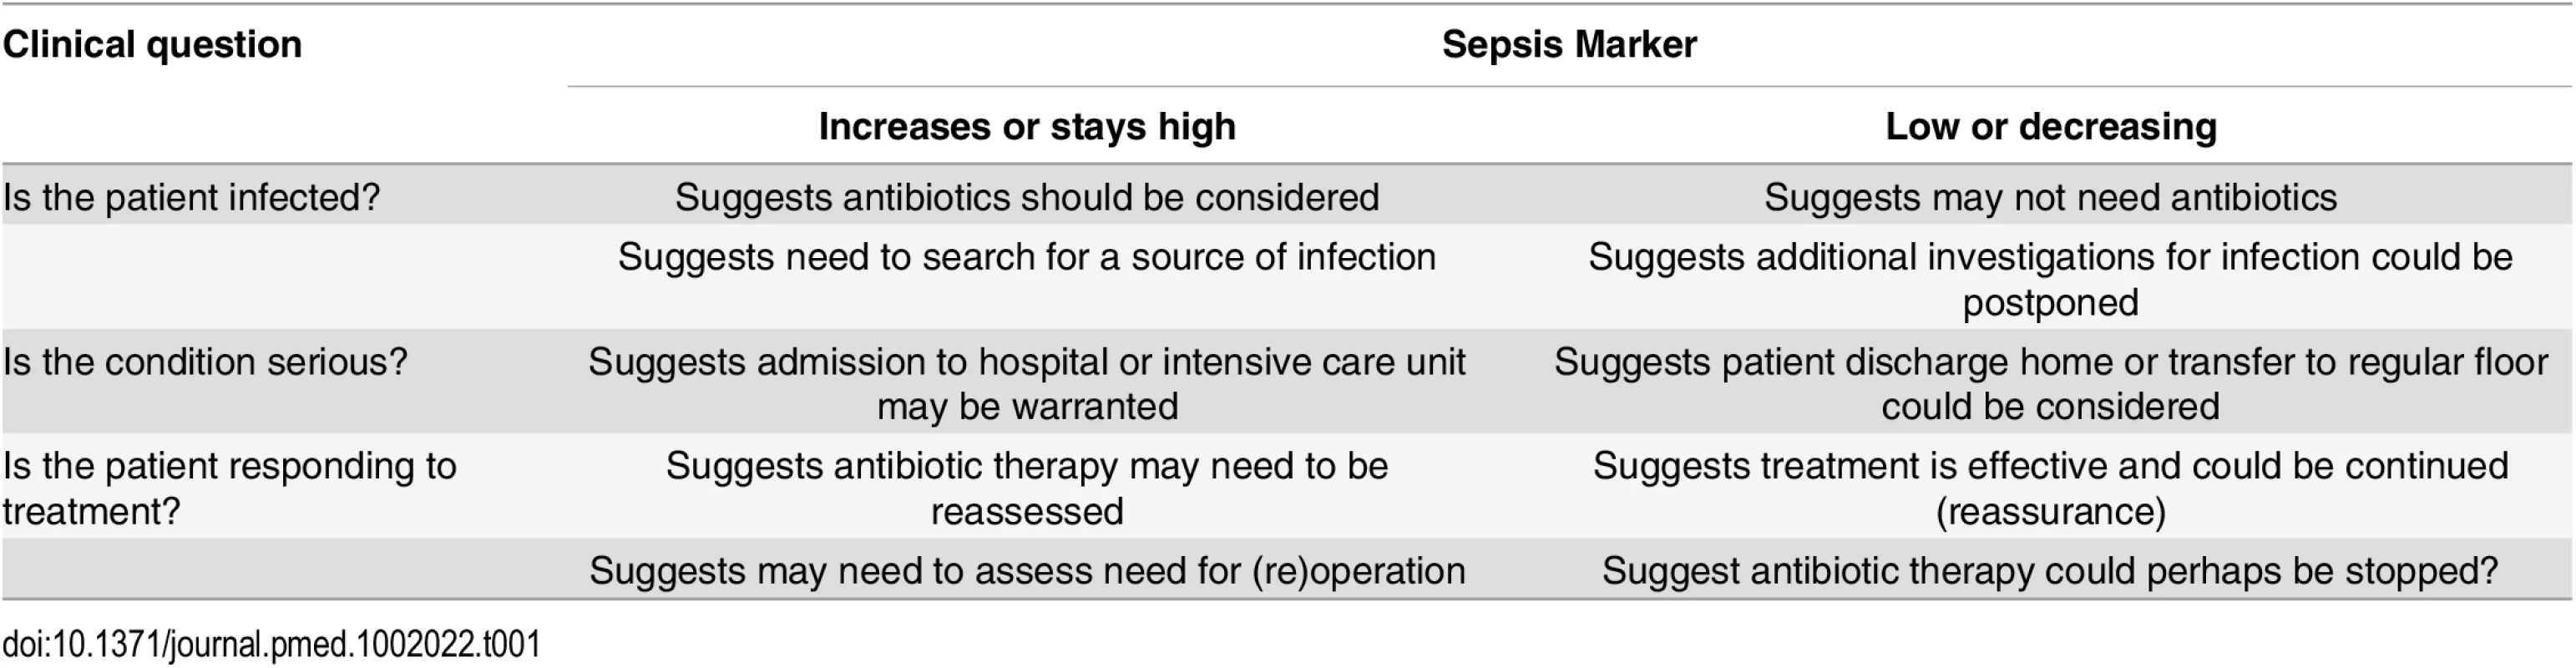 How a biomarker, levels of which increase in sepsis, can be used to answer clinically important questions.